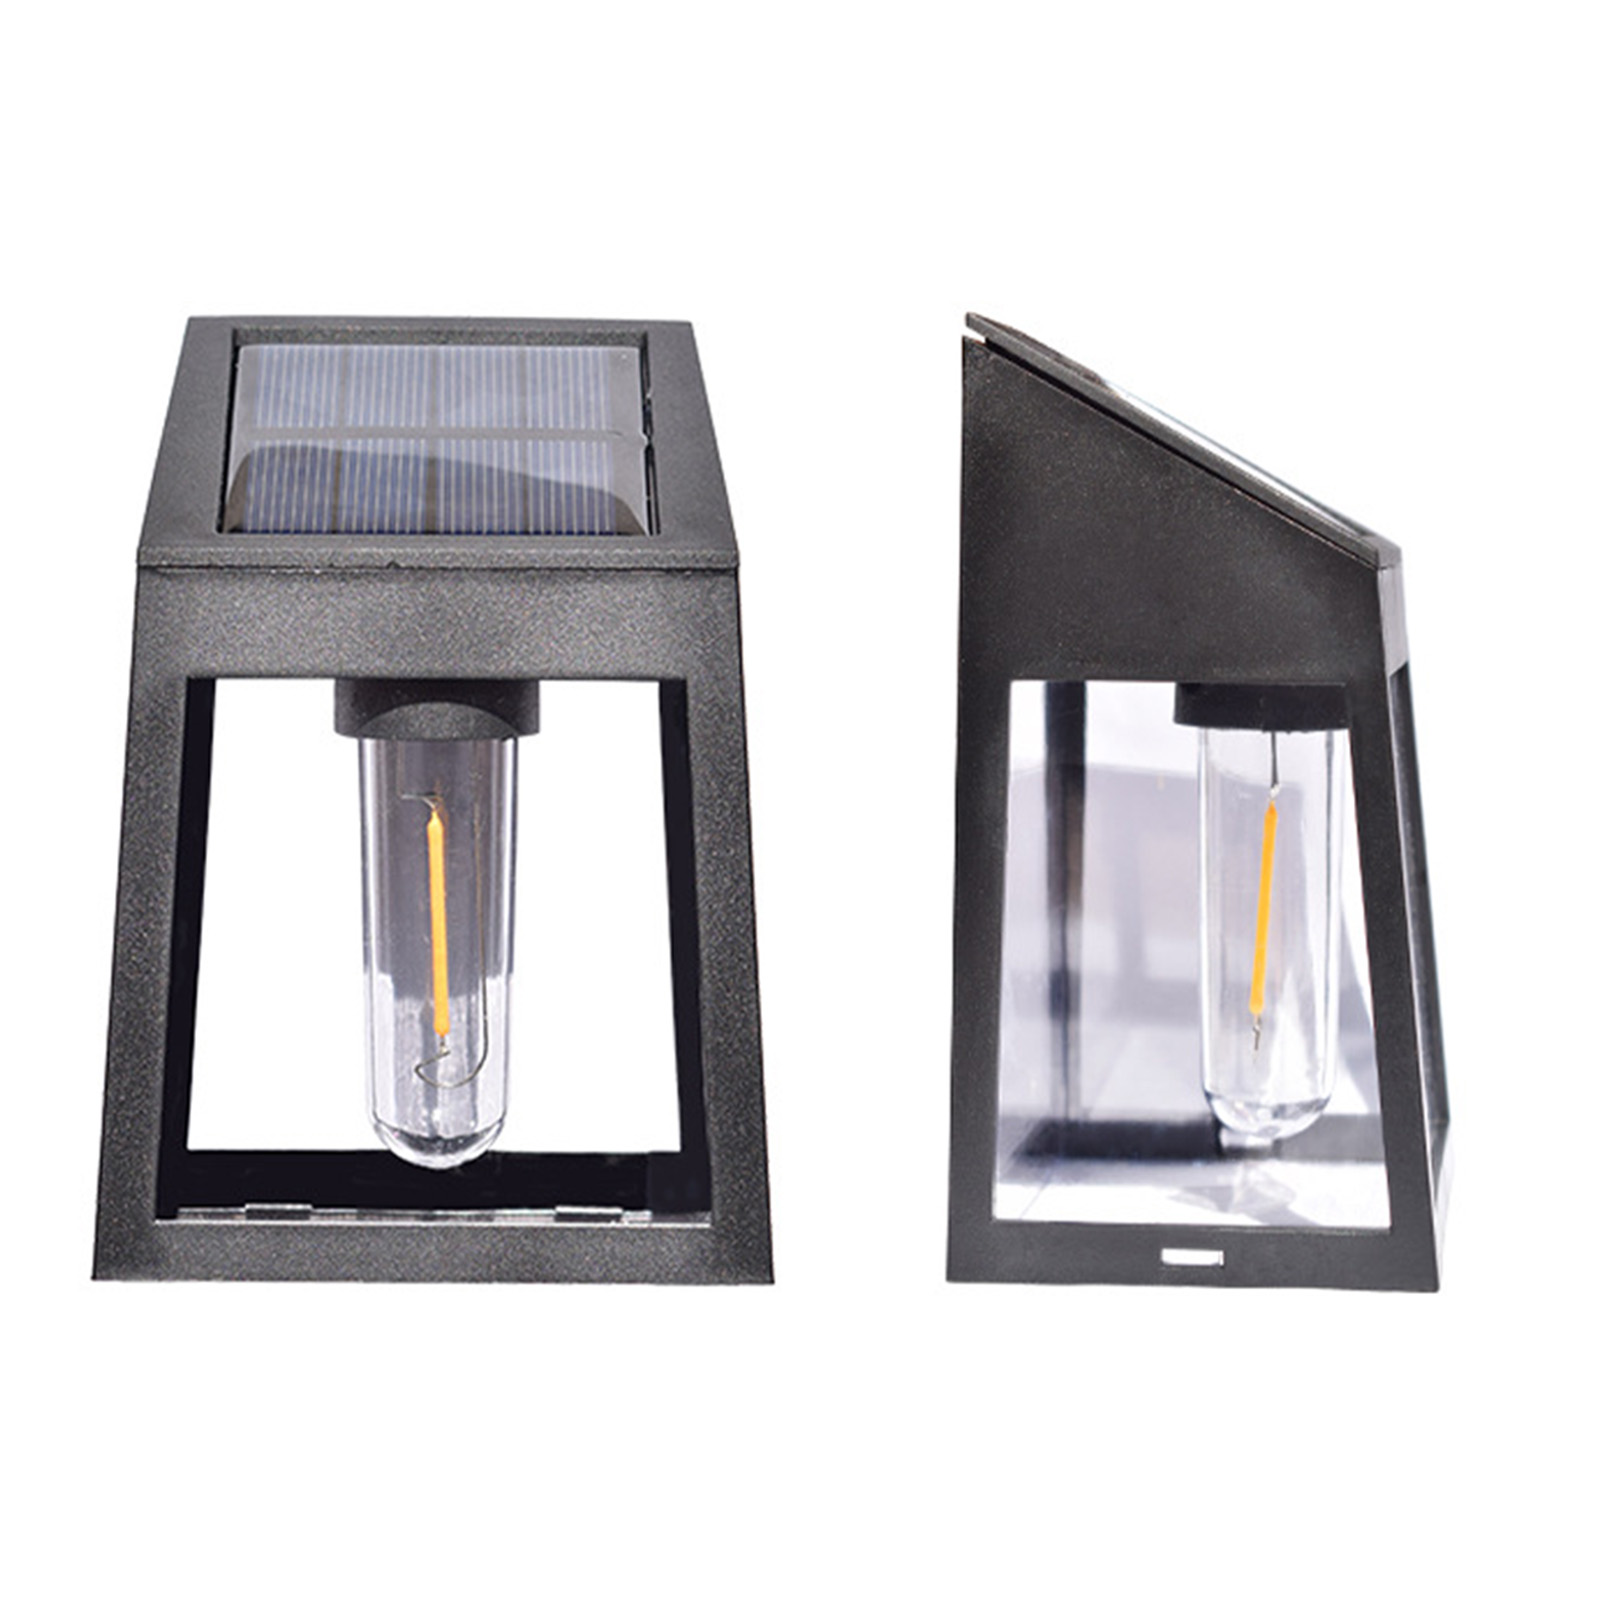 2pcs Outdoor LED Solar Wall Lamp With Solar Panel IP65 Waterproof Auto On/off Modern Minimalist Wall Light Fixtures